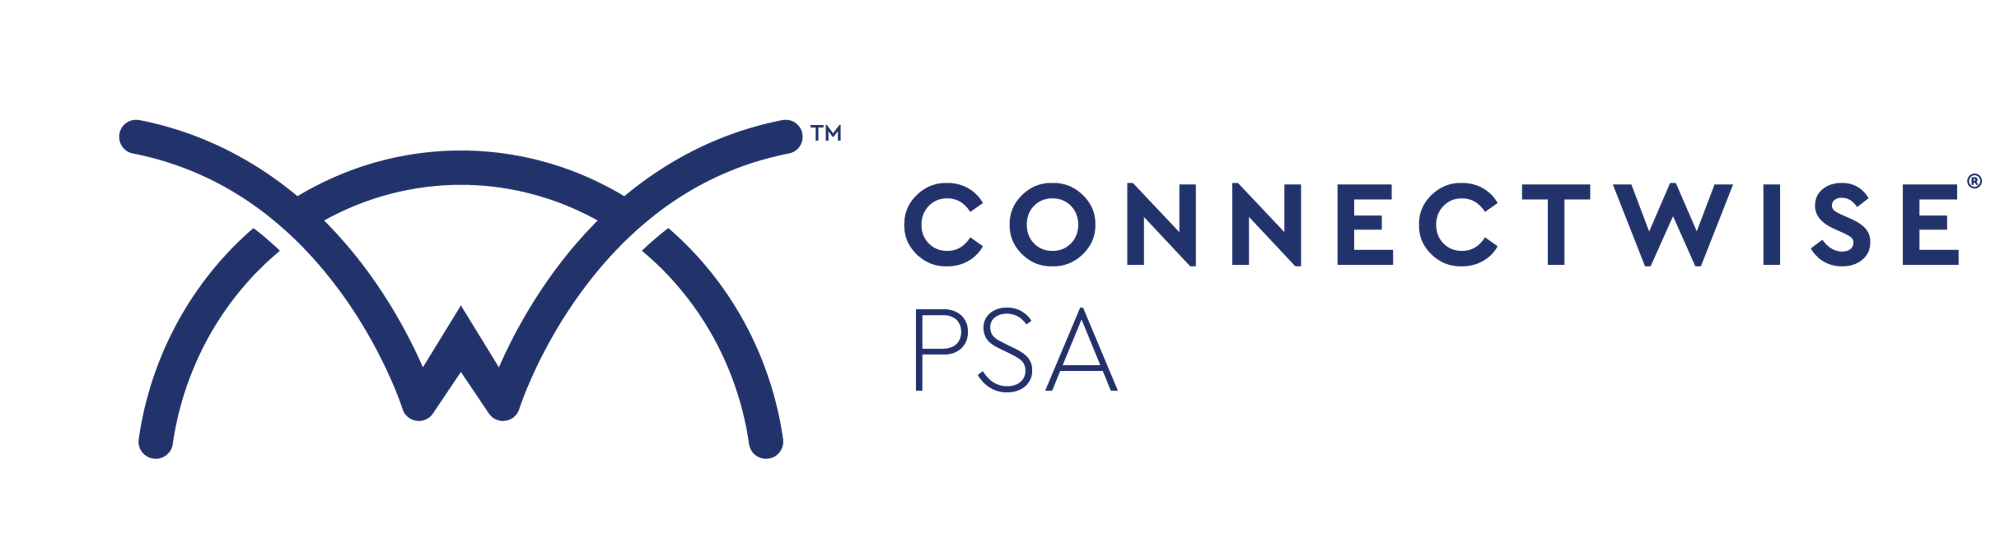 CONNECTWISE PSA